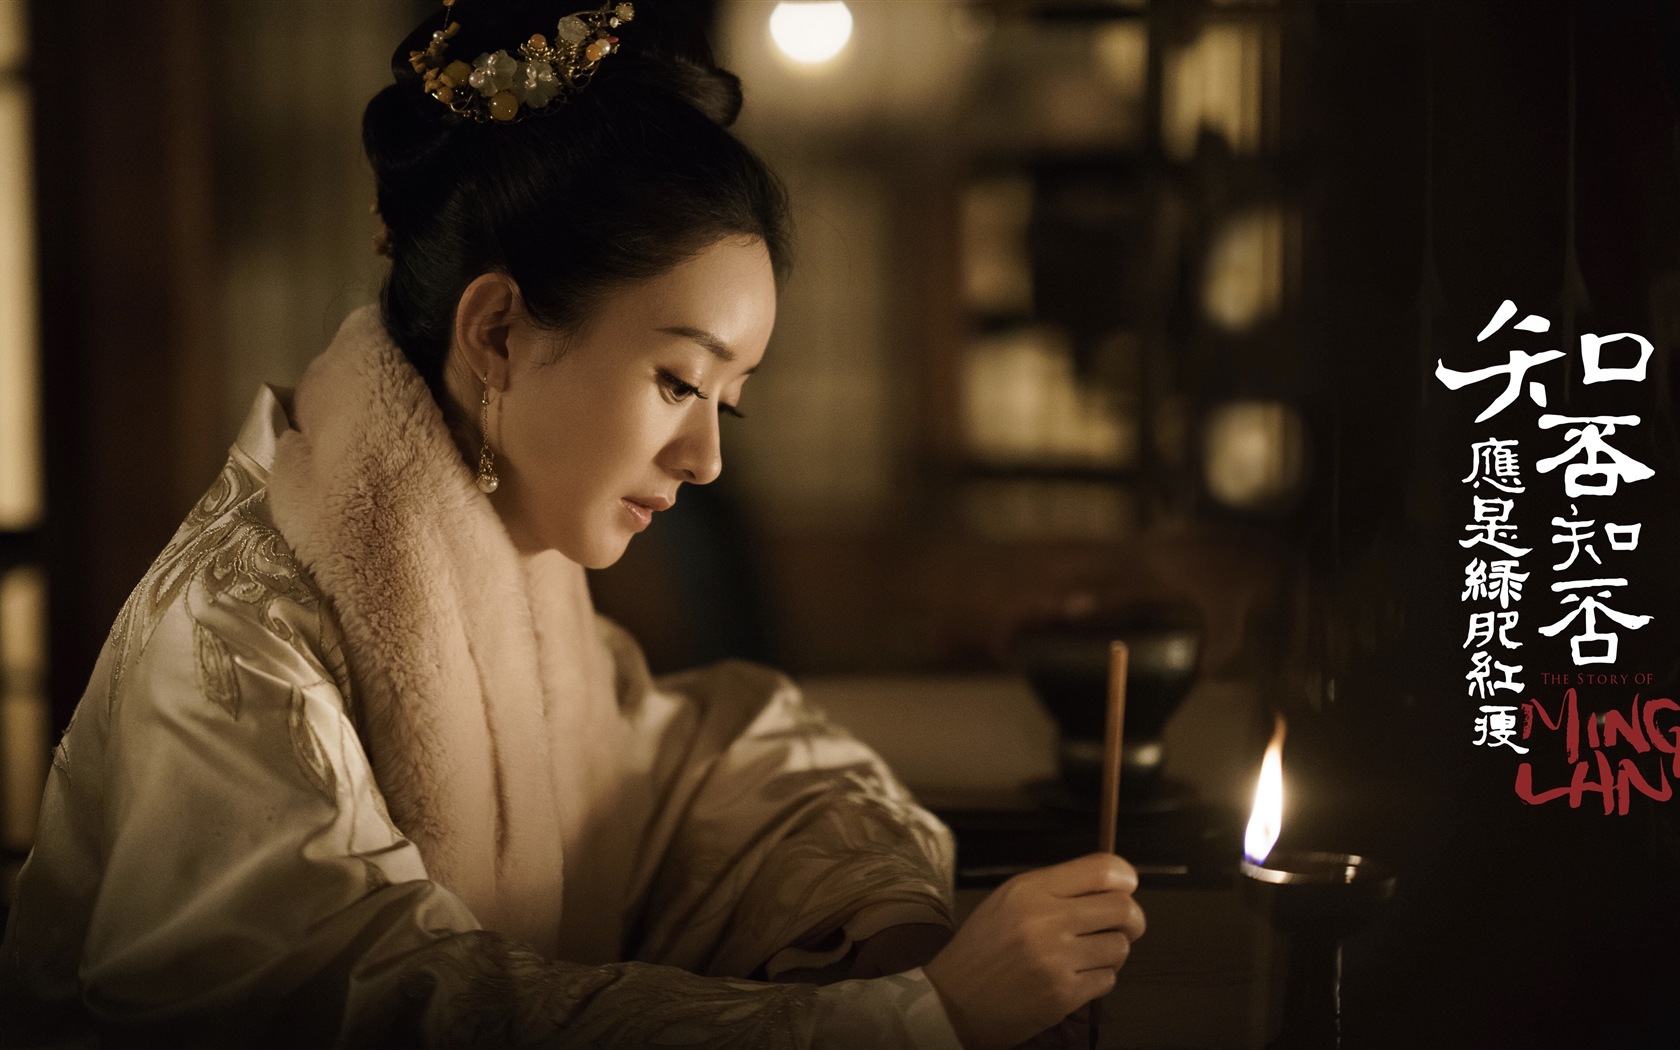 The Story Of MingLan, TV series HD wallpapers #26 - 1680x1050